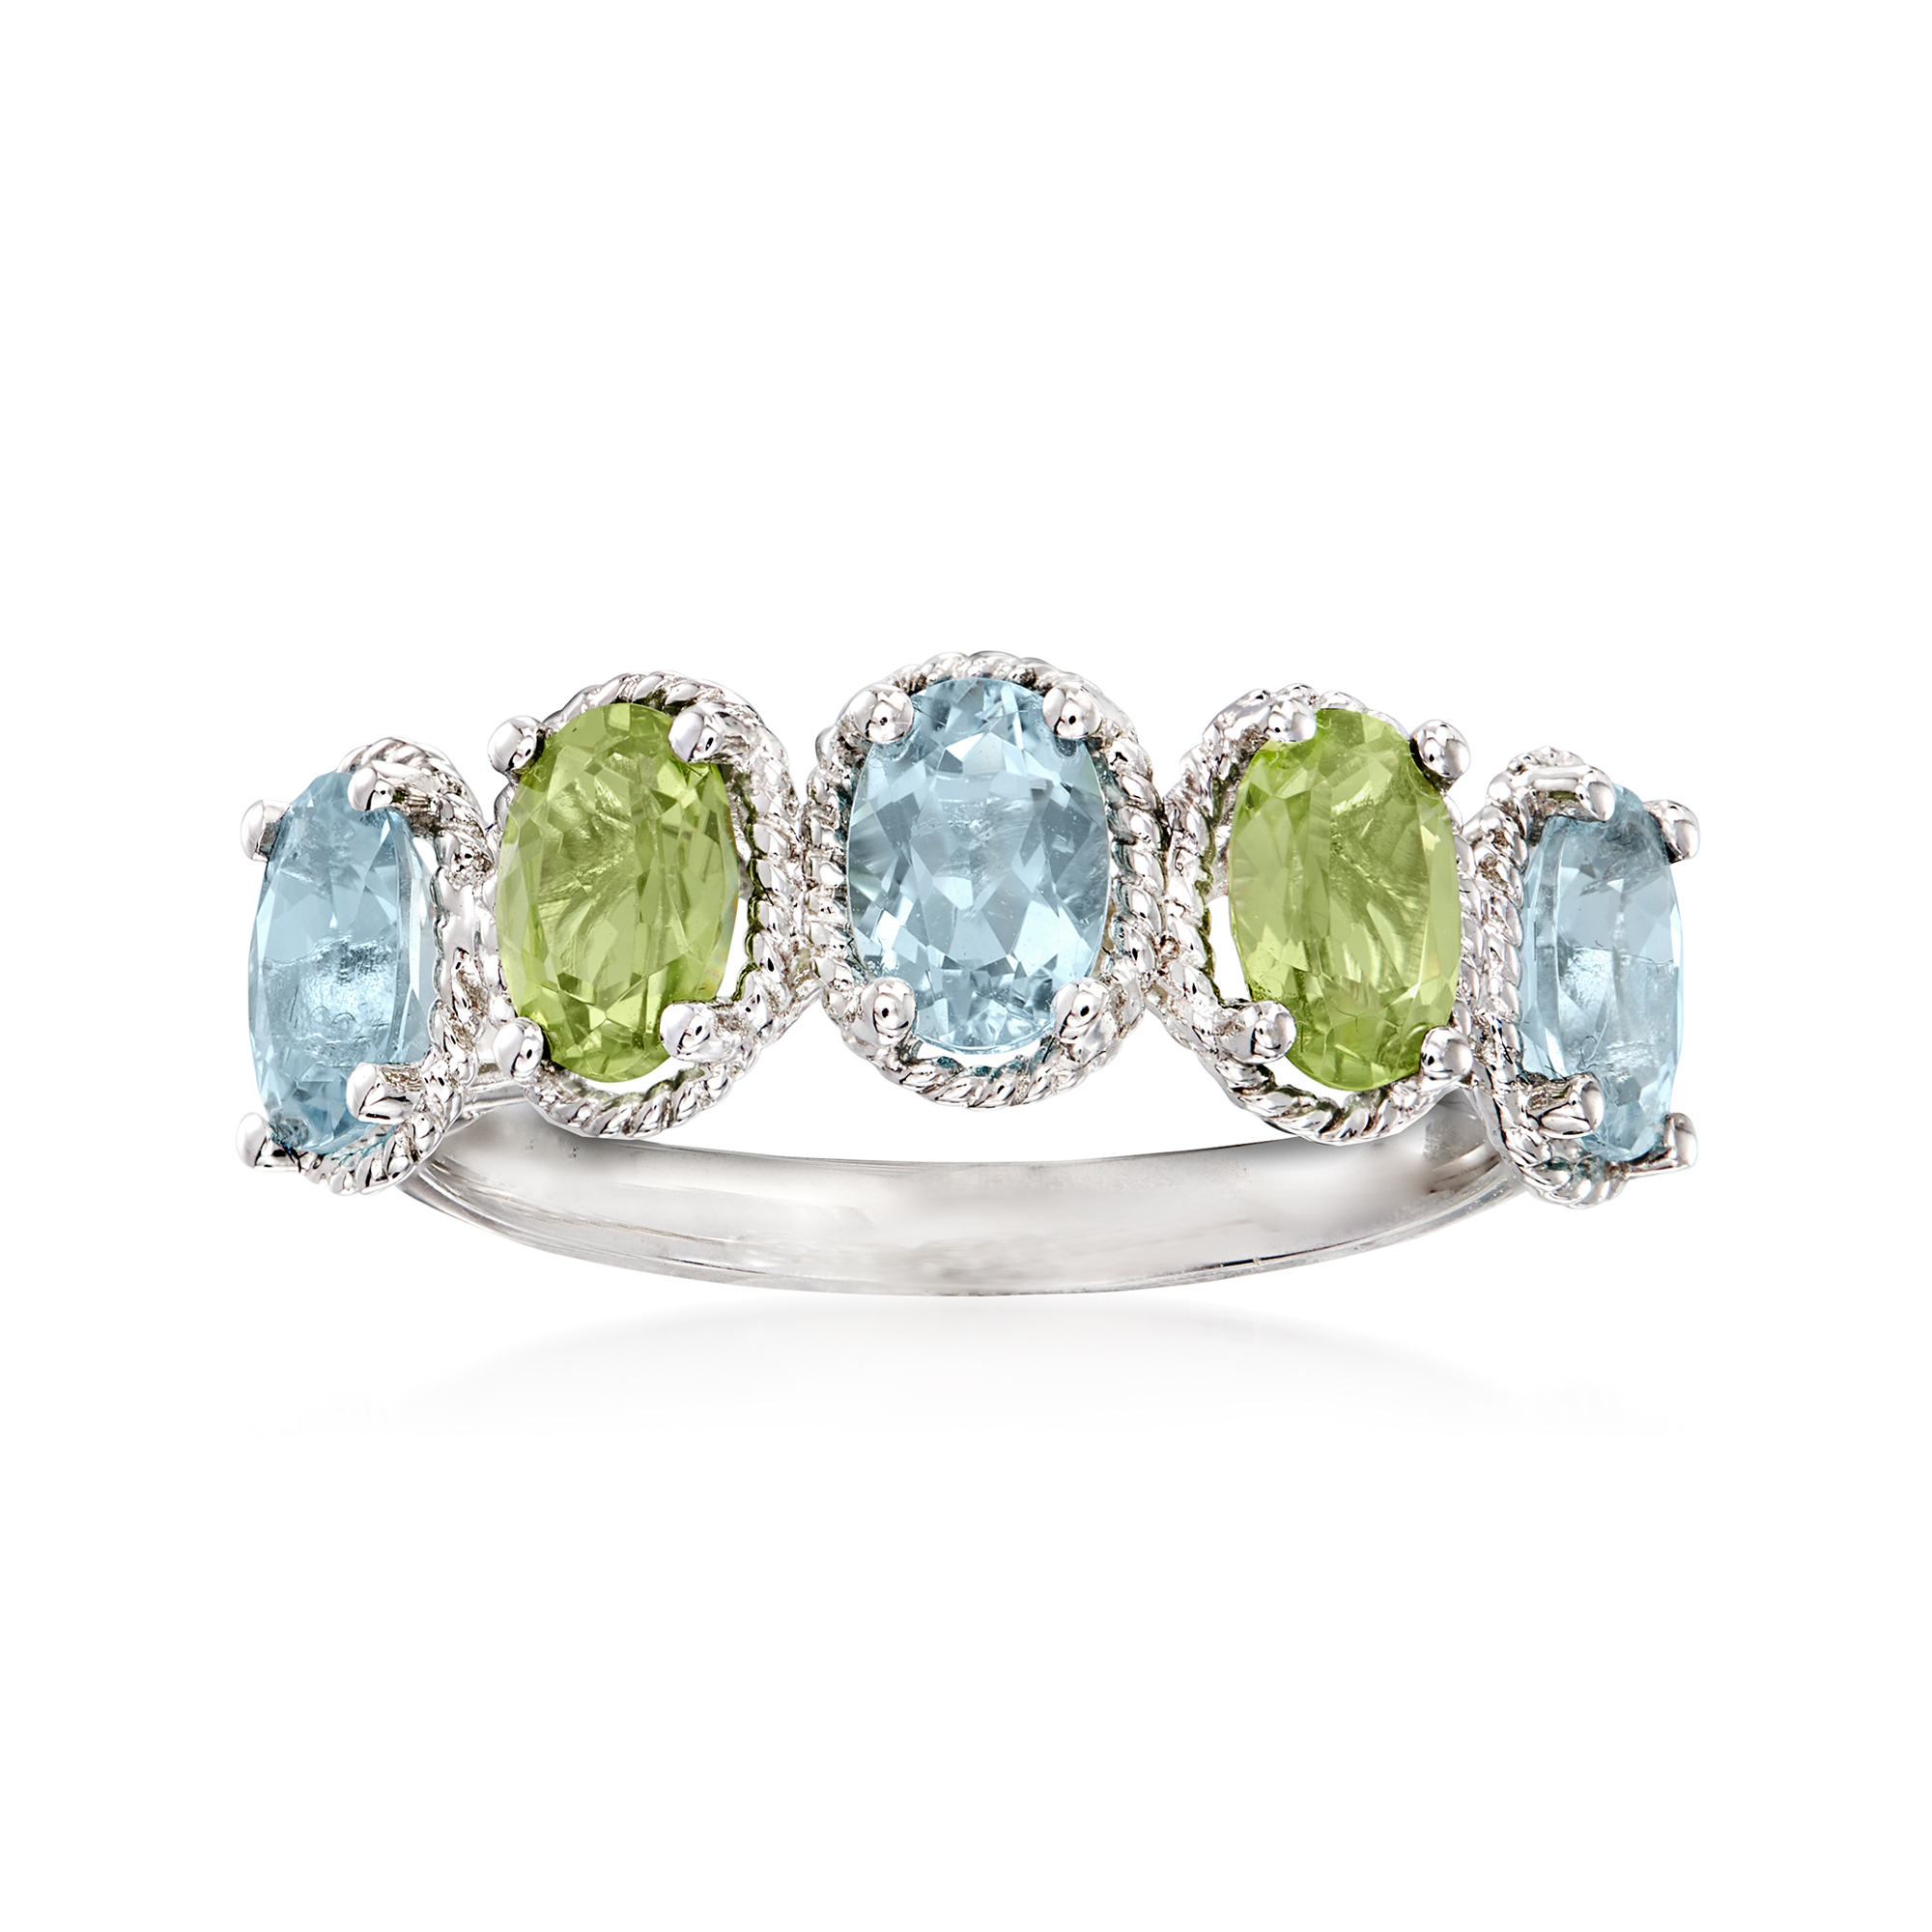 1.10 ct. t.w. Aquamarine and .90 ct. t.w. Peridot Ring in 14kt White Gold |  Ross-Simons